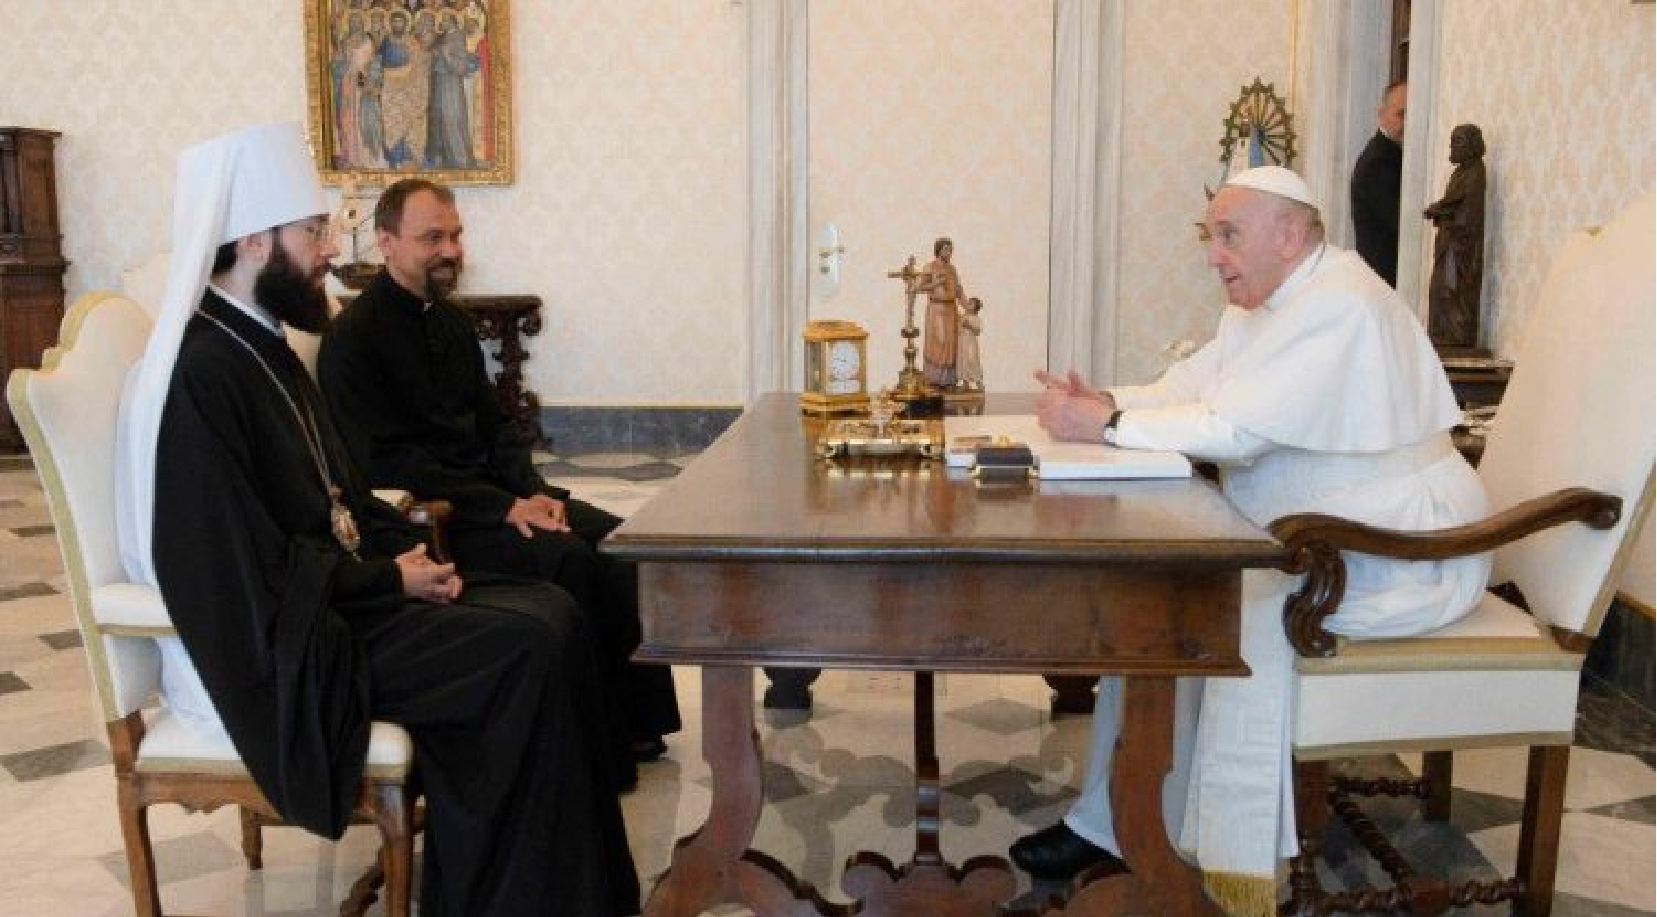 This is the fourth occasion in which the Second in the Hierarchy of the Russian Orthodox meets with the Holy Father.